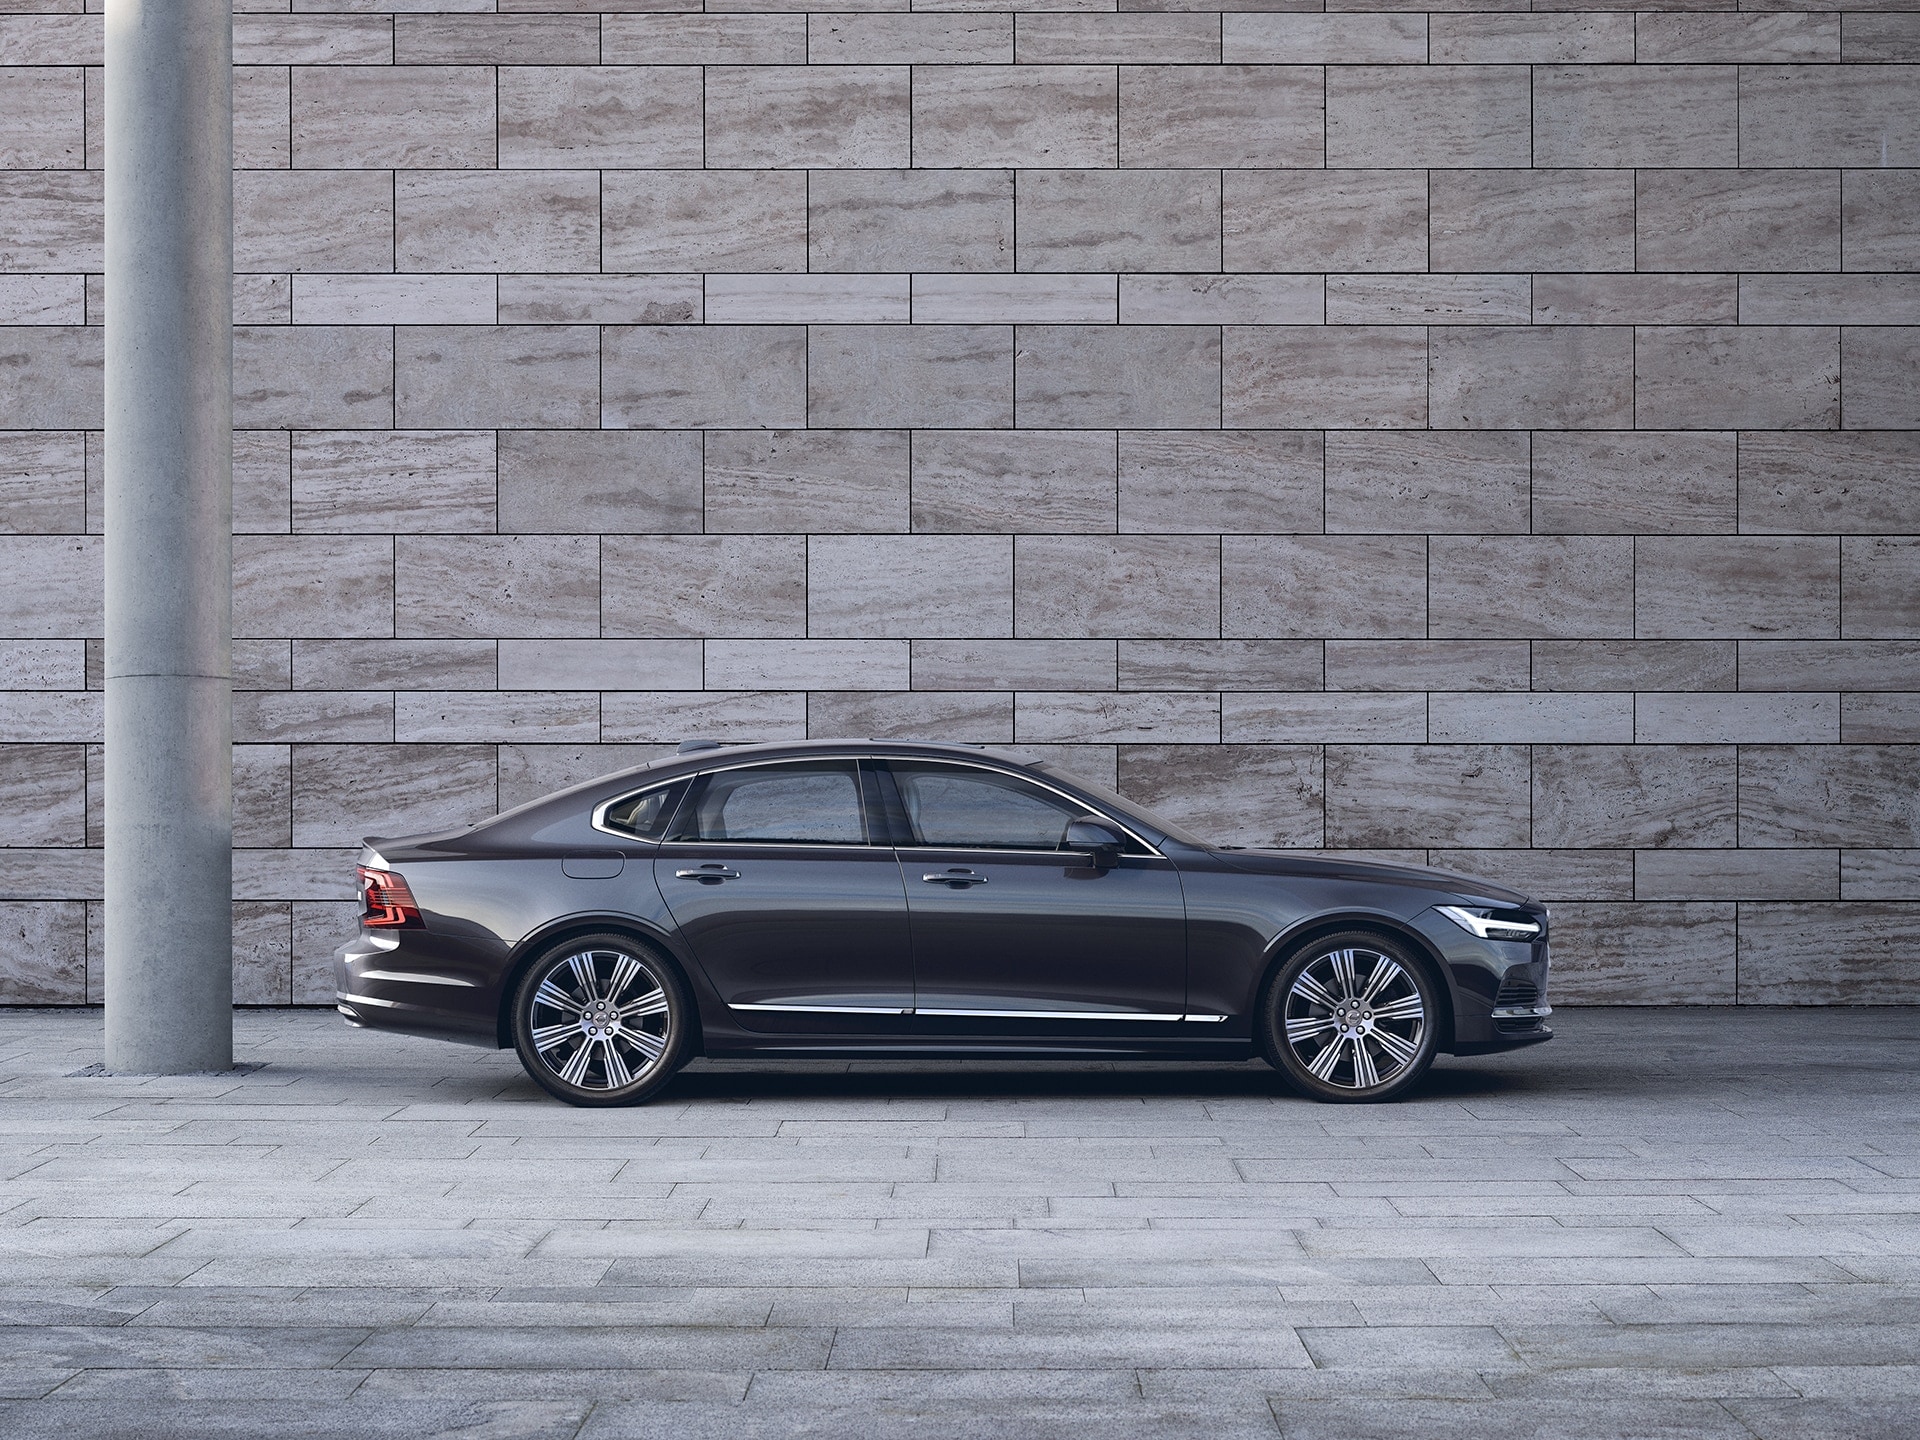 A dark Volvo S90 is parked in front of a grey wall